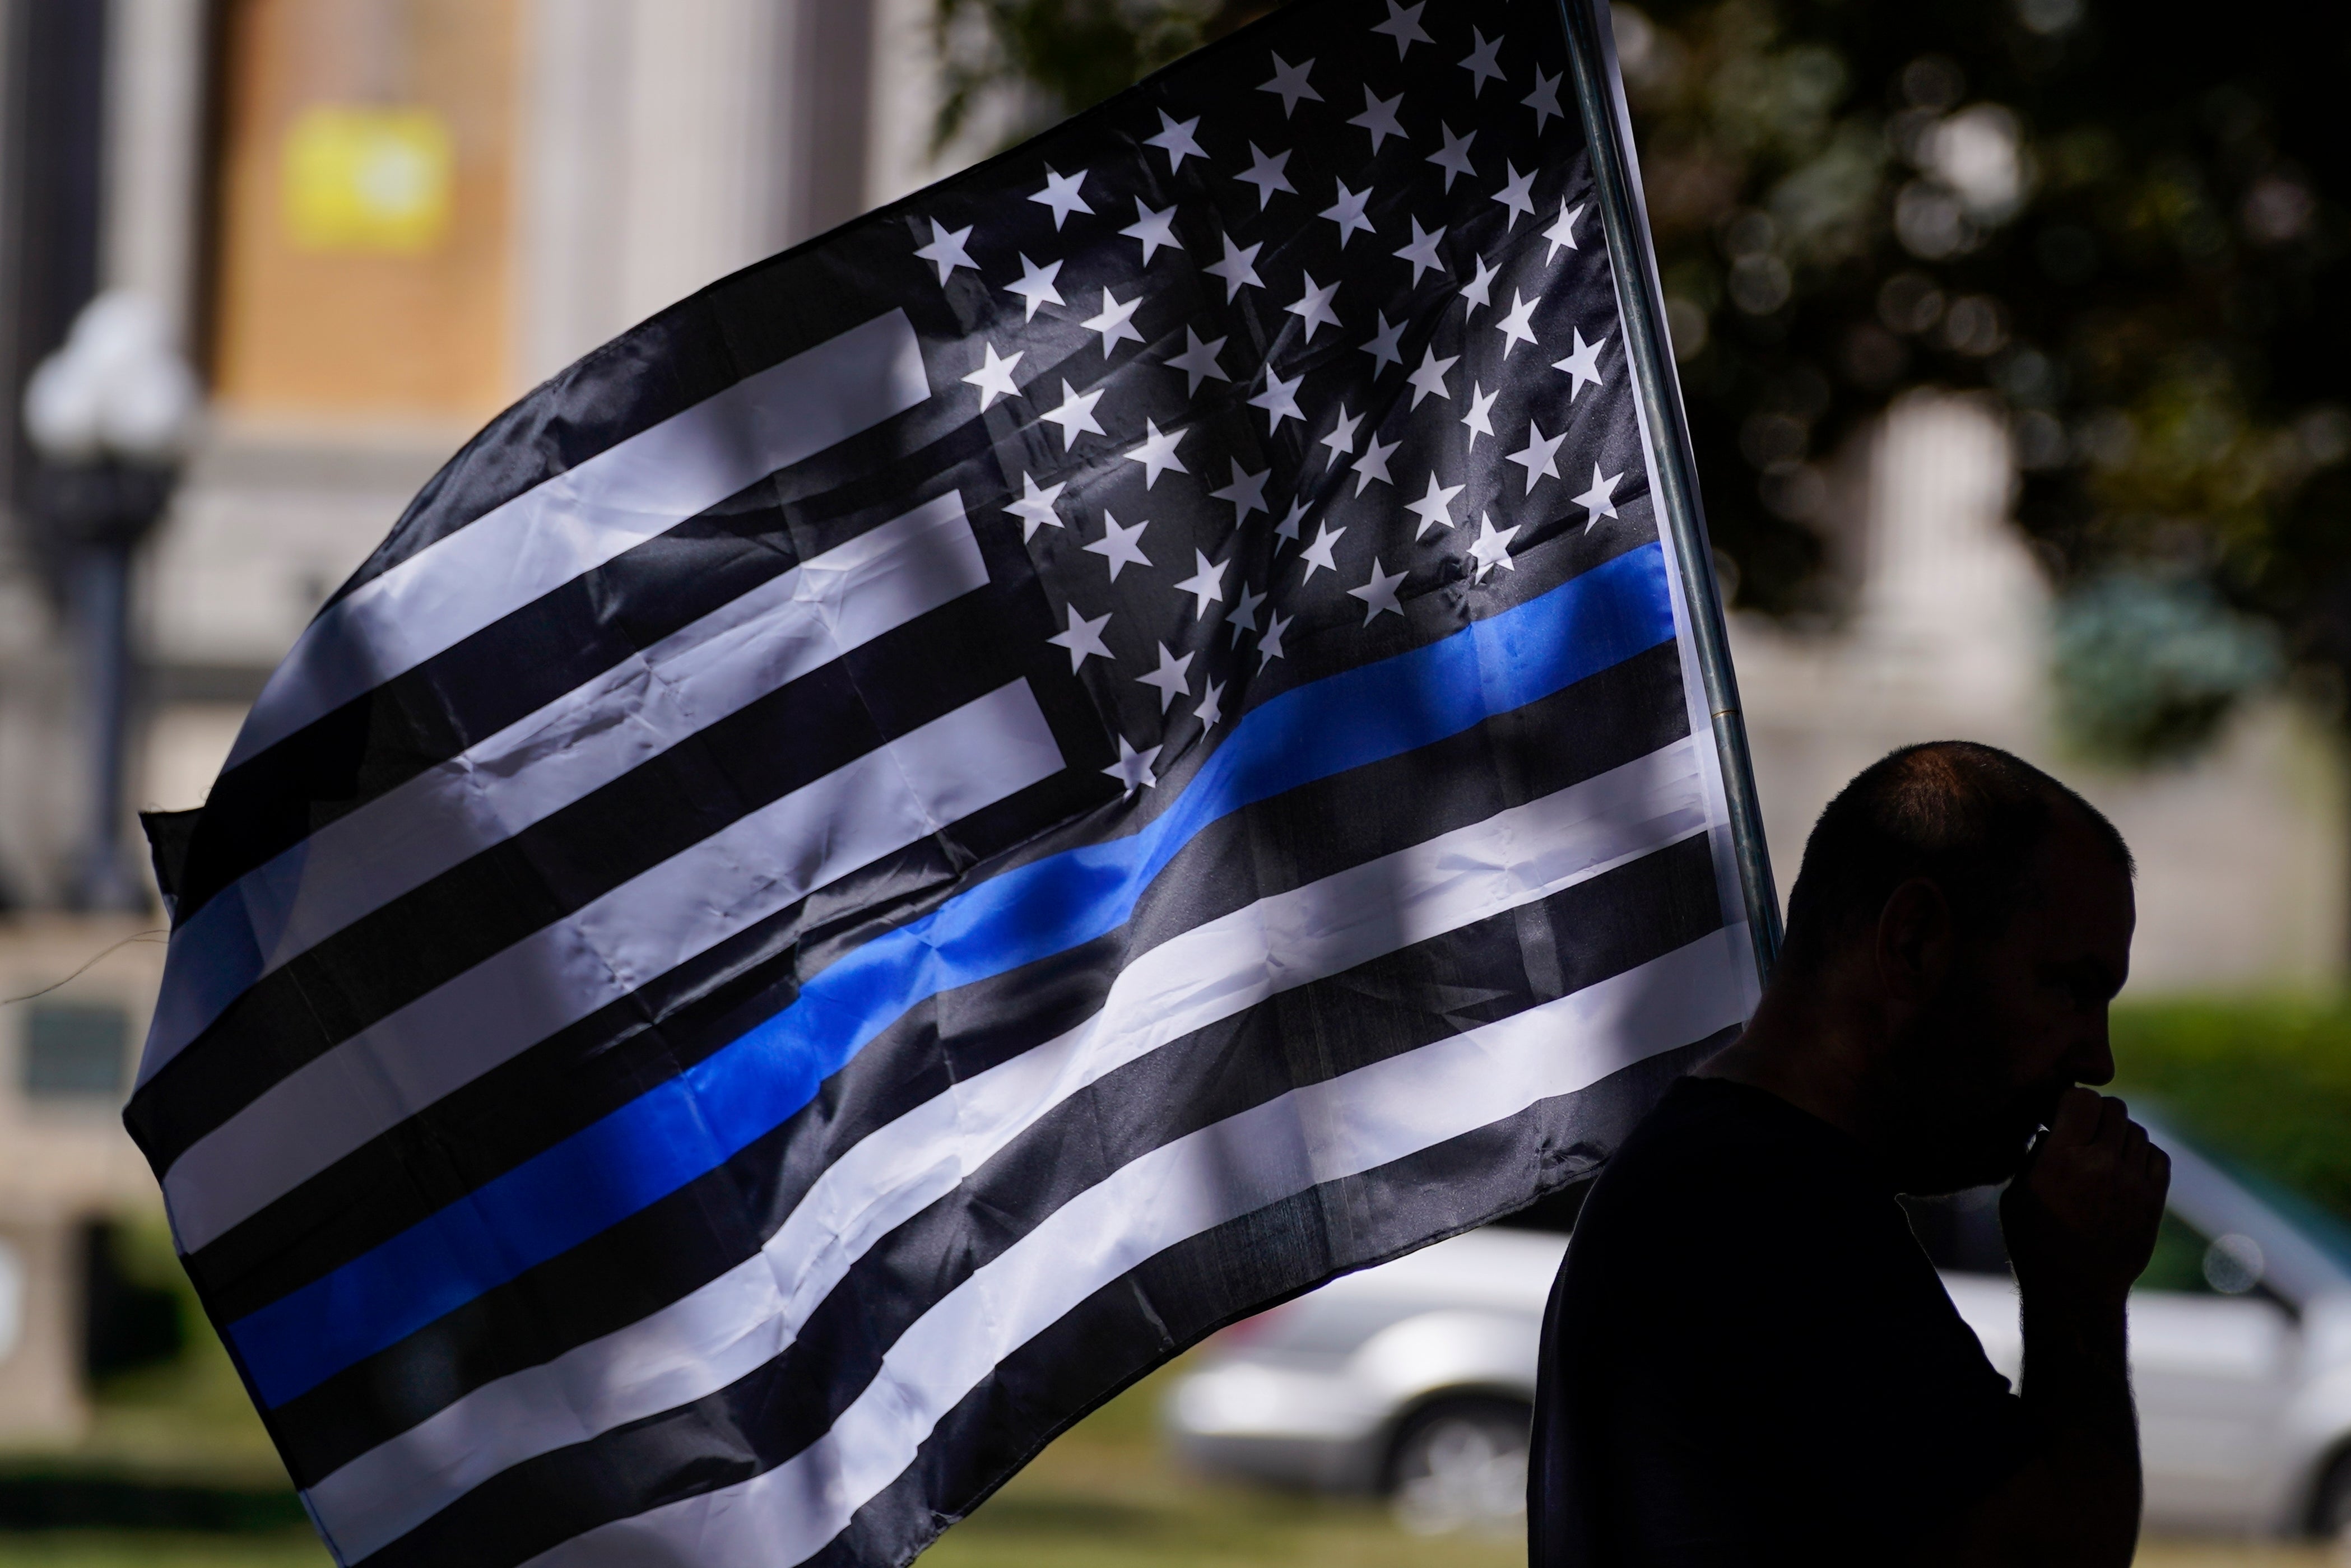 How Oakley came to be accused of 'fascism' for selling Thin Blue Line  sunglasses